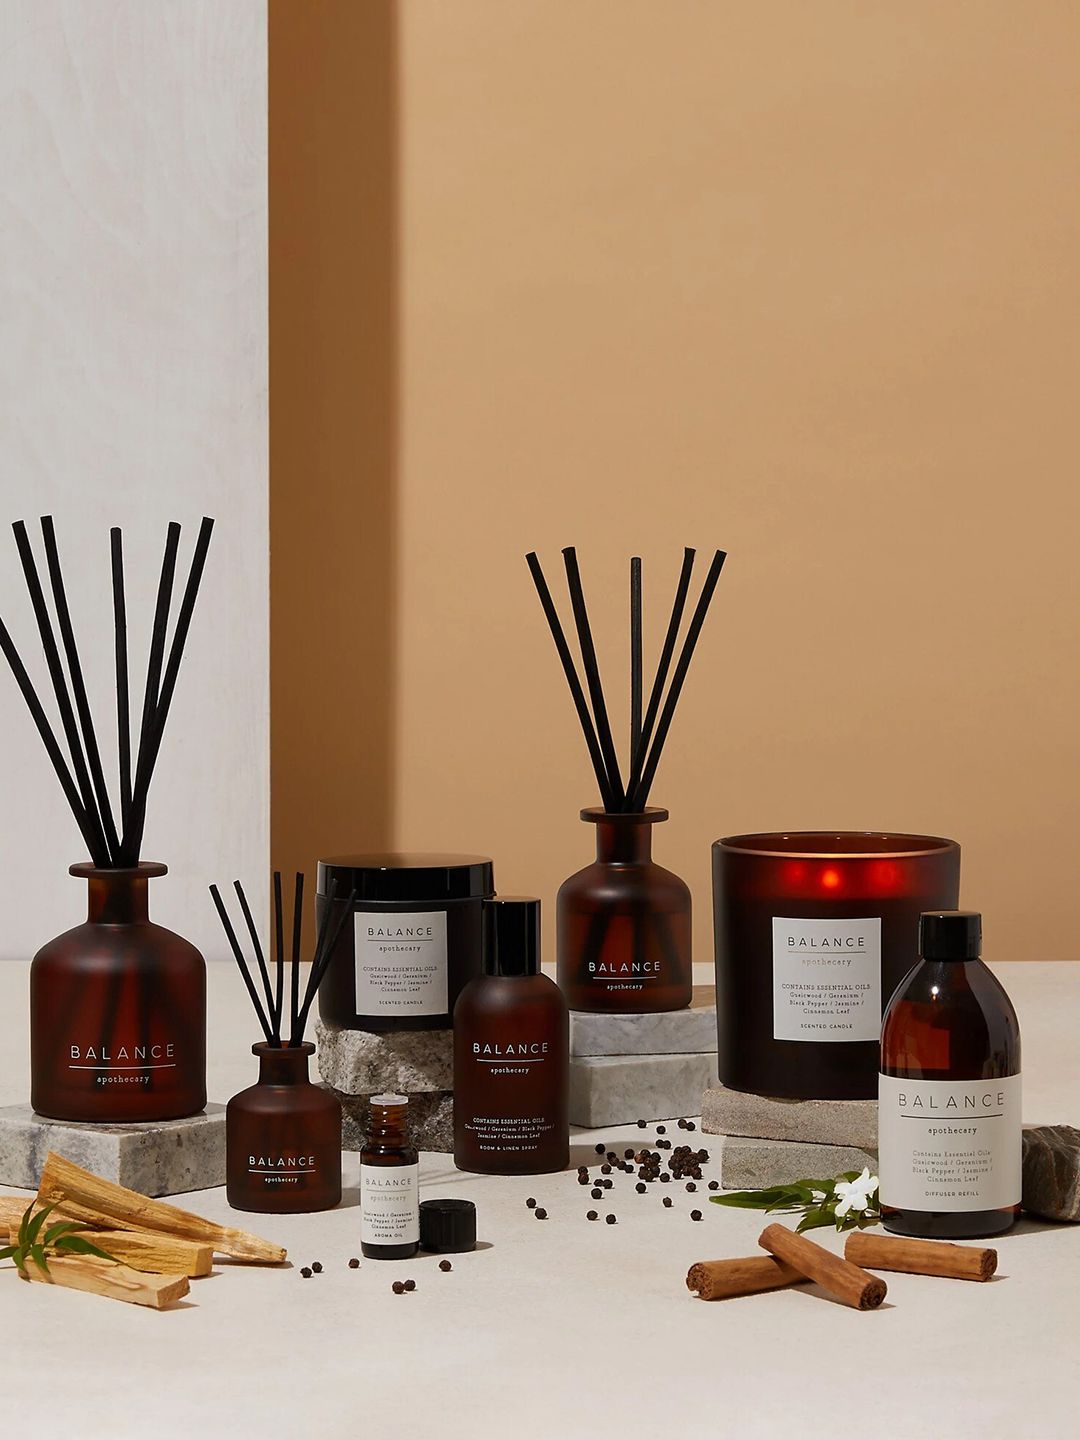 Marks & Spencer Balance Apothecary Scented Diffuser 30 ml Price in India